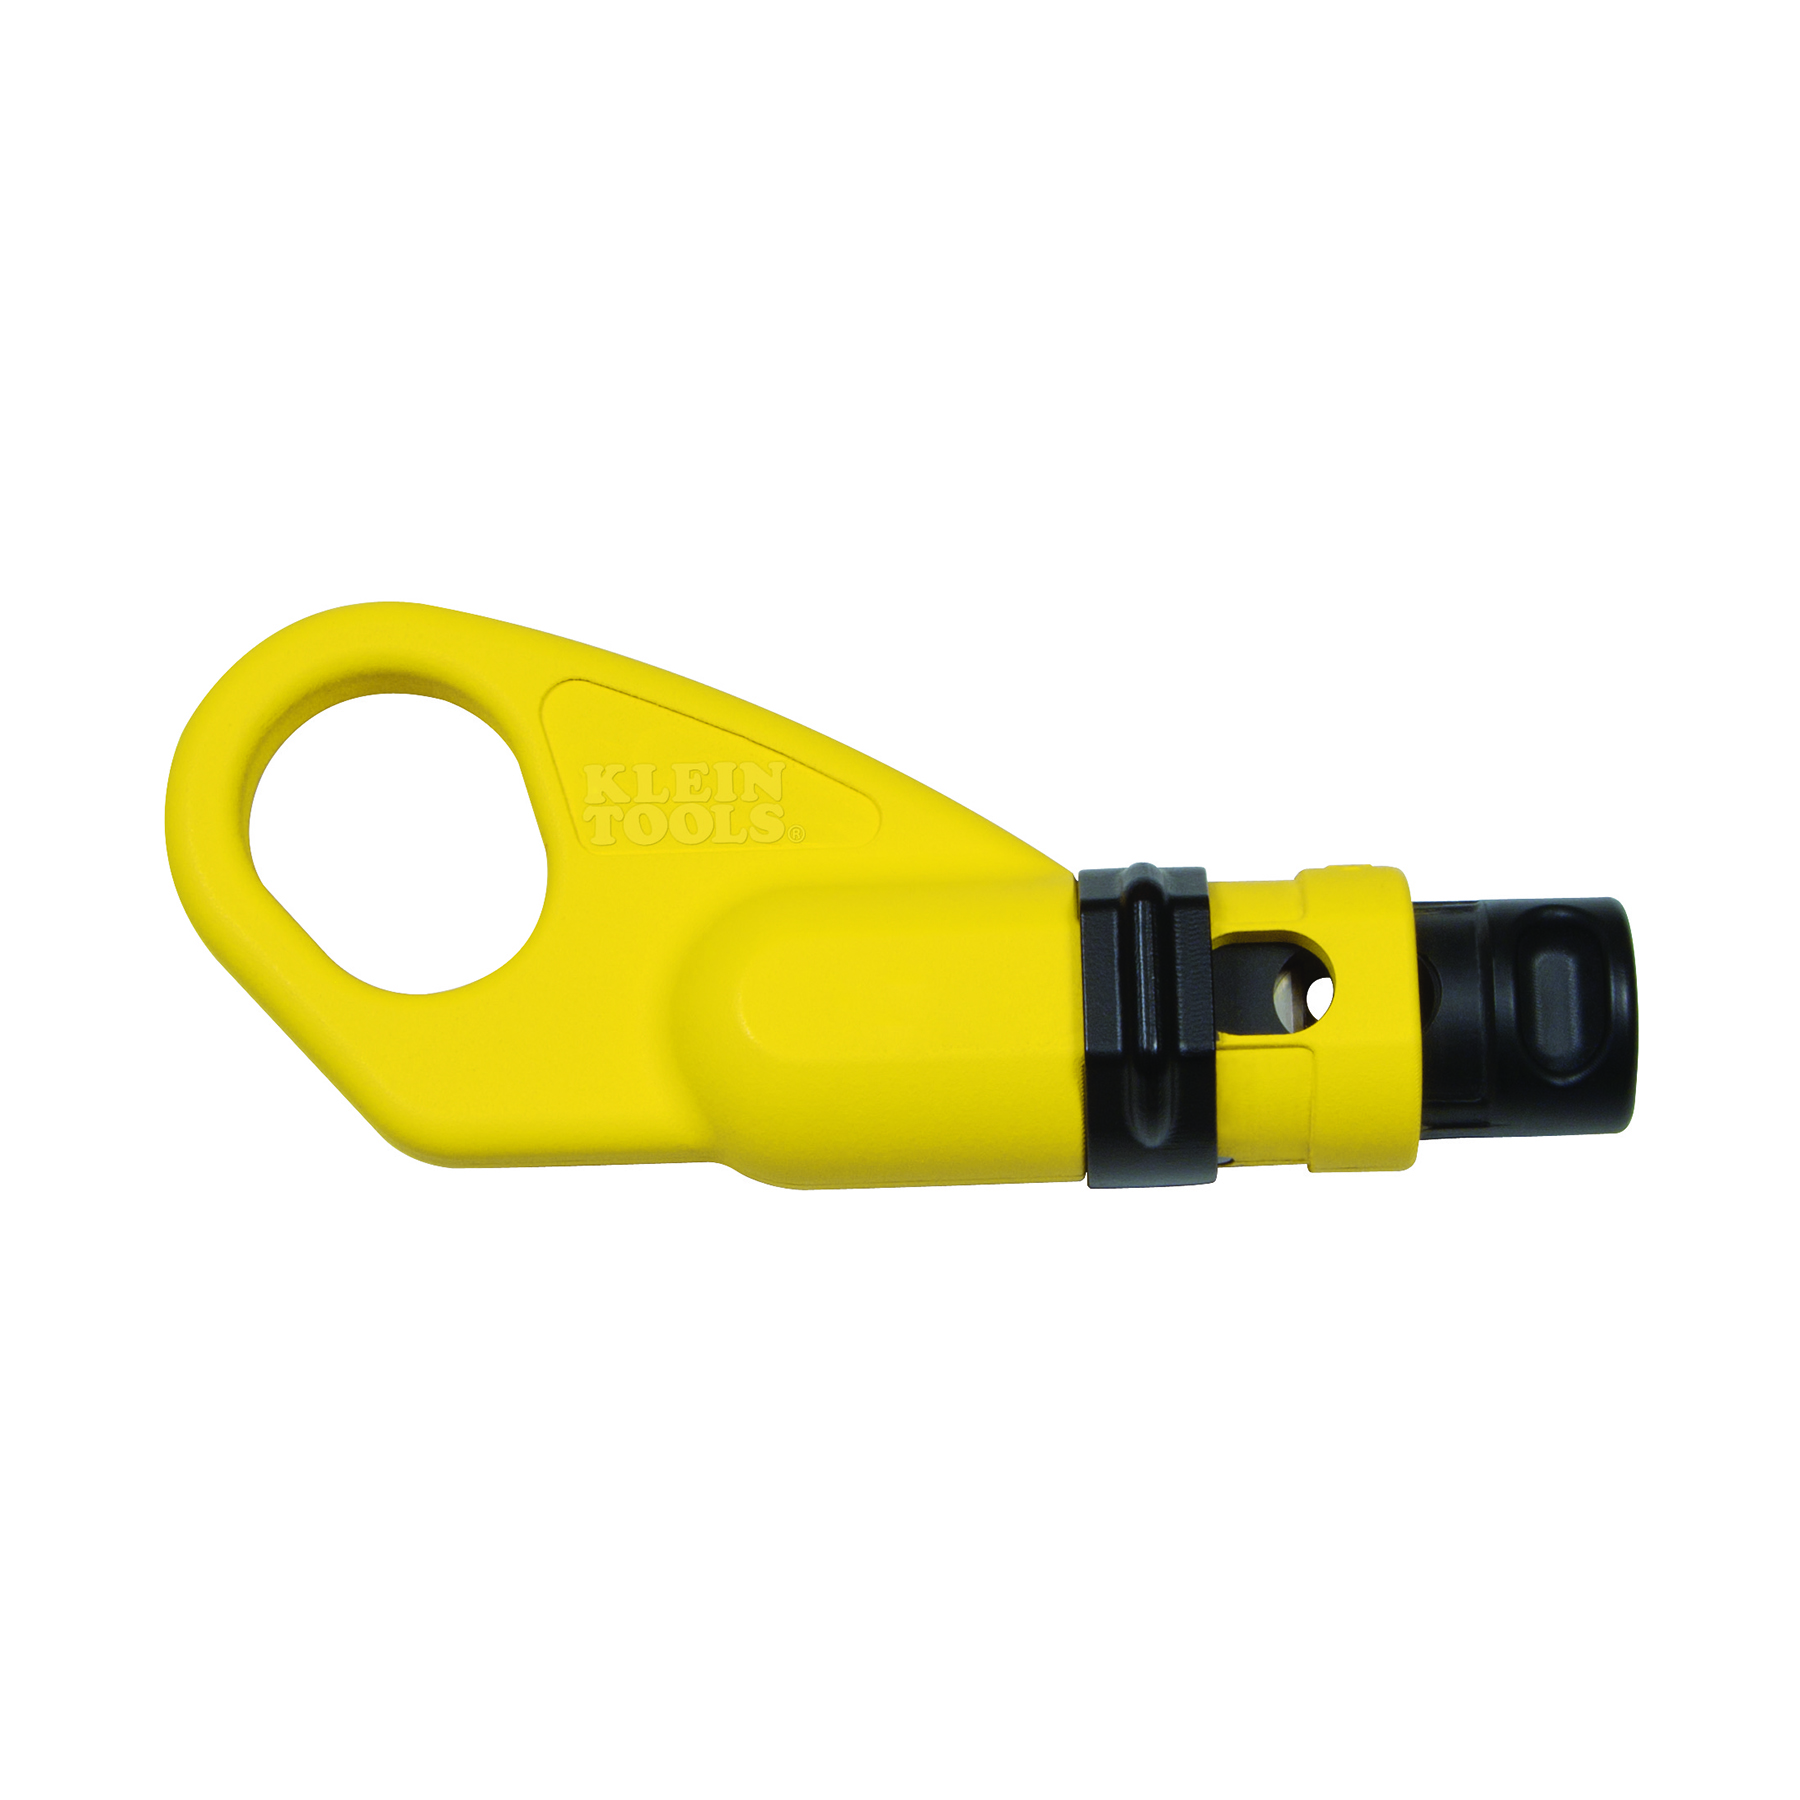 Radial" for sale online "Klein Tools VDV110061 Coax Cable Stripper 2-Level 